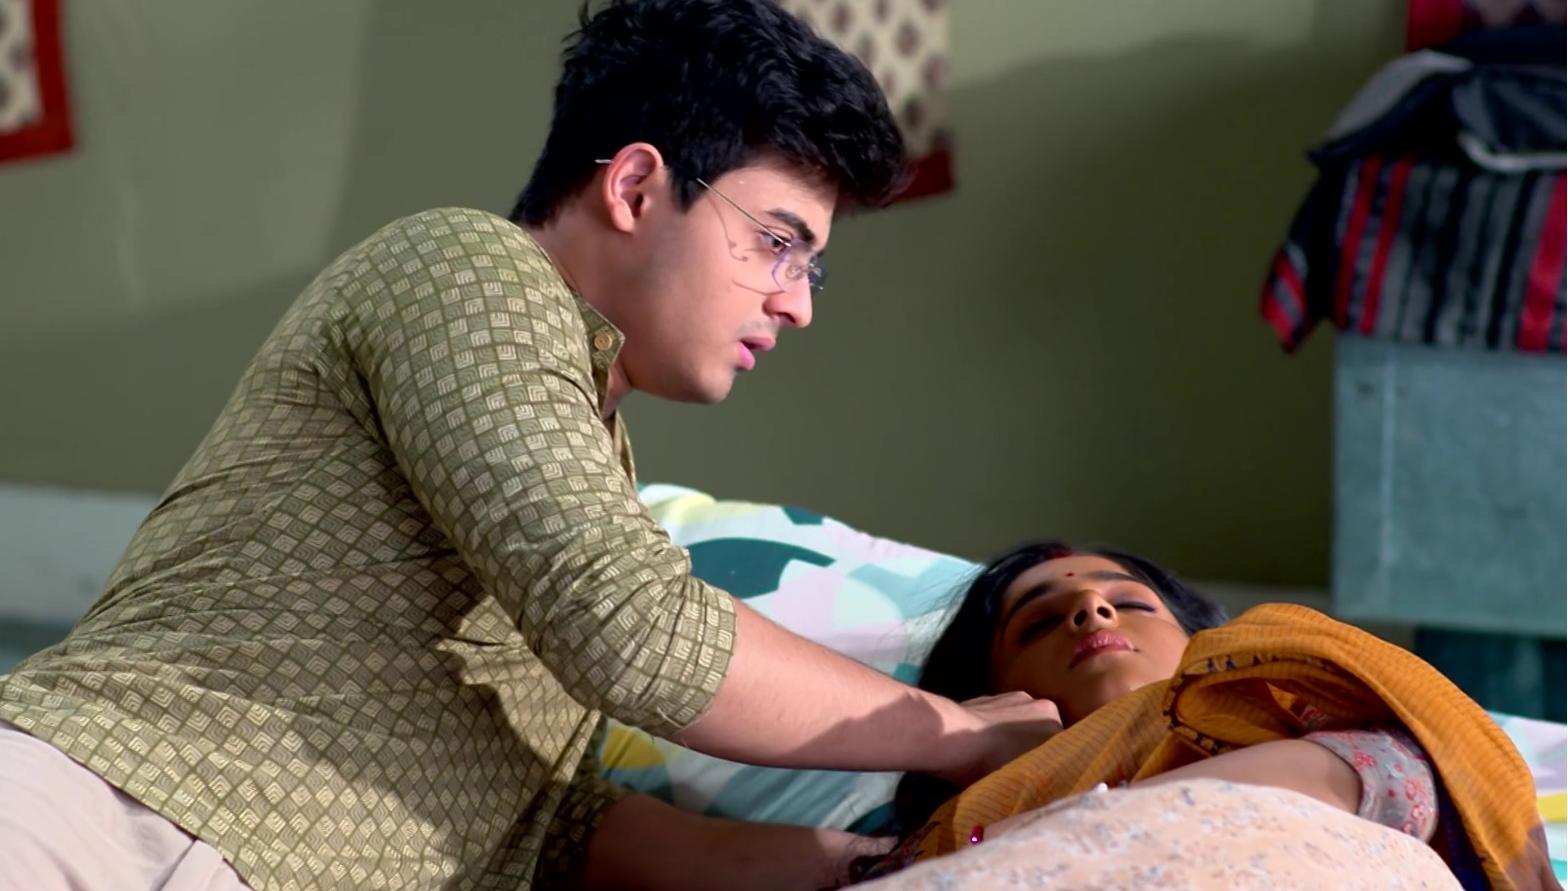 Anurager Chowa Surja takes care for Deepa at night